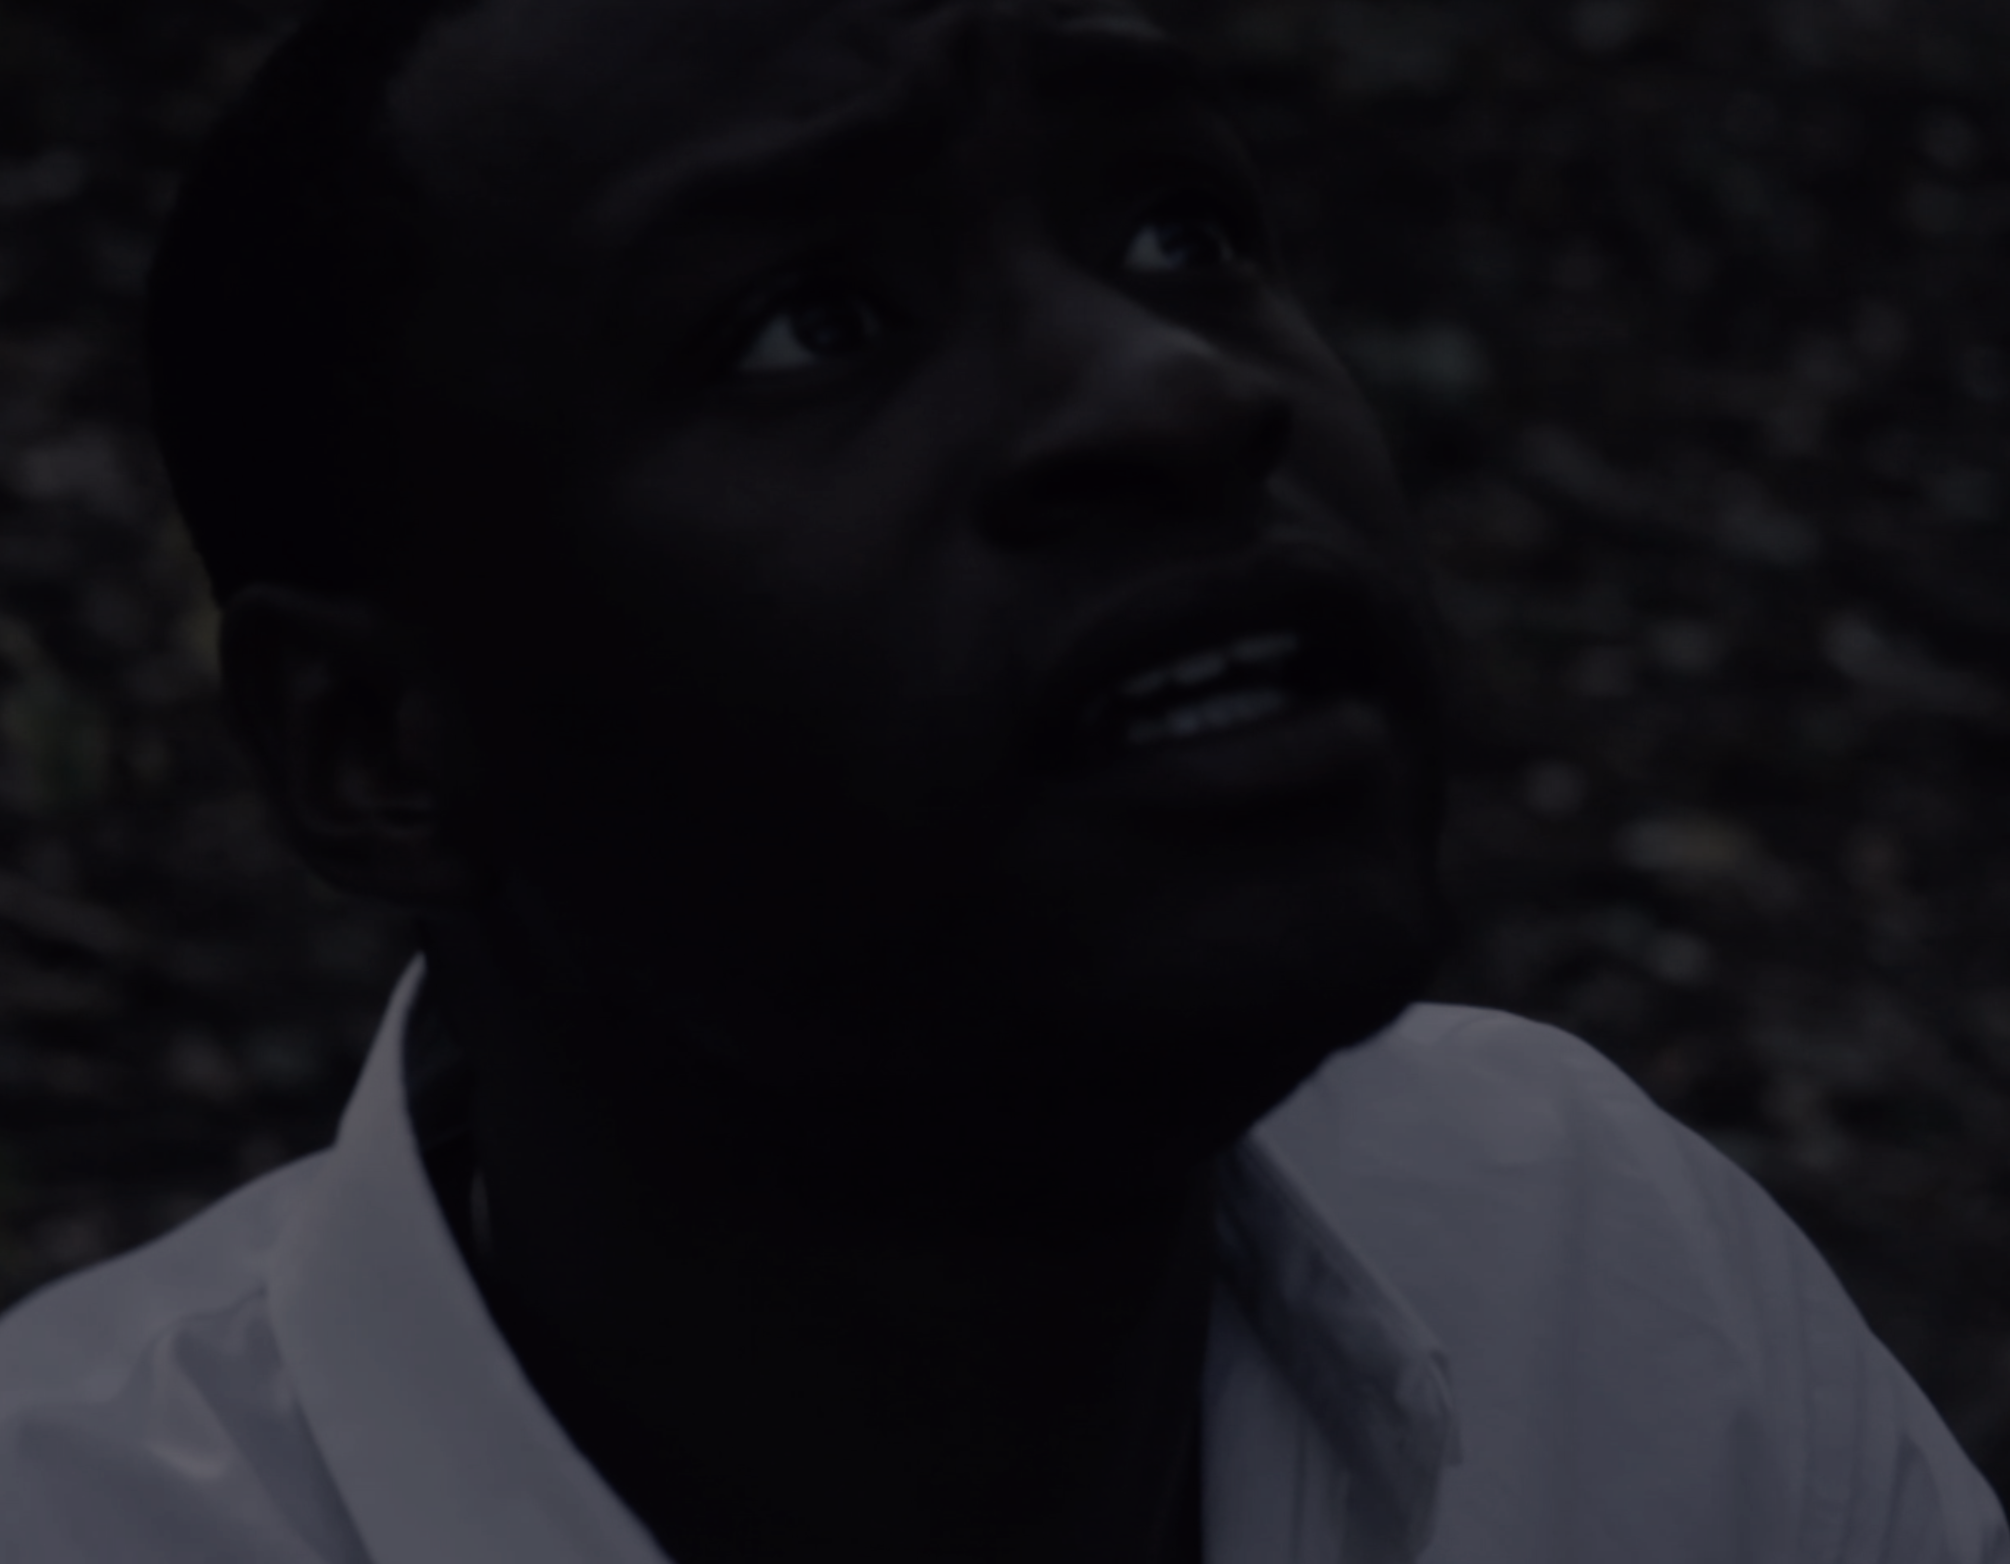  ‘The Black Boy and The Tree’ (2016), written &amp; directed by Shikeith, 4:49, follows a Black man (Michael Oloyede), as he journeys into the woods to persuade a mysterious Black boy to come down from a tree he has made his home. 